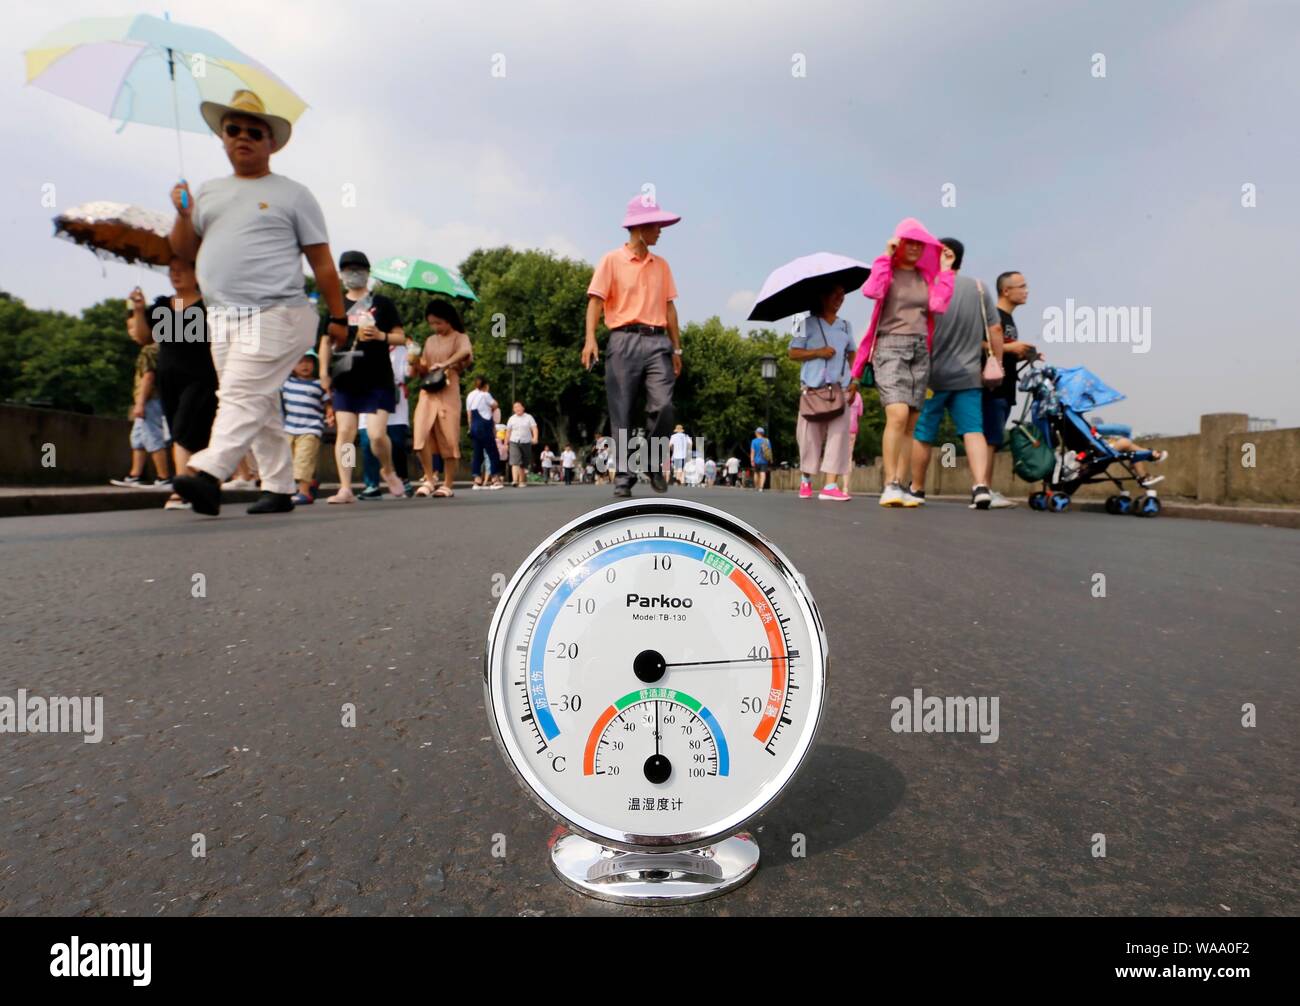 A local resident displays a thermometer showing the current temperature reaching 40 degrees Celsius on the West Lake scenic spot in Hangzhou city, eas Stock Photo